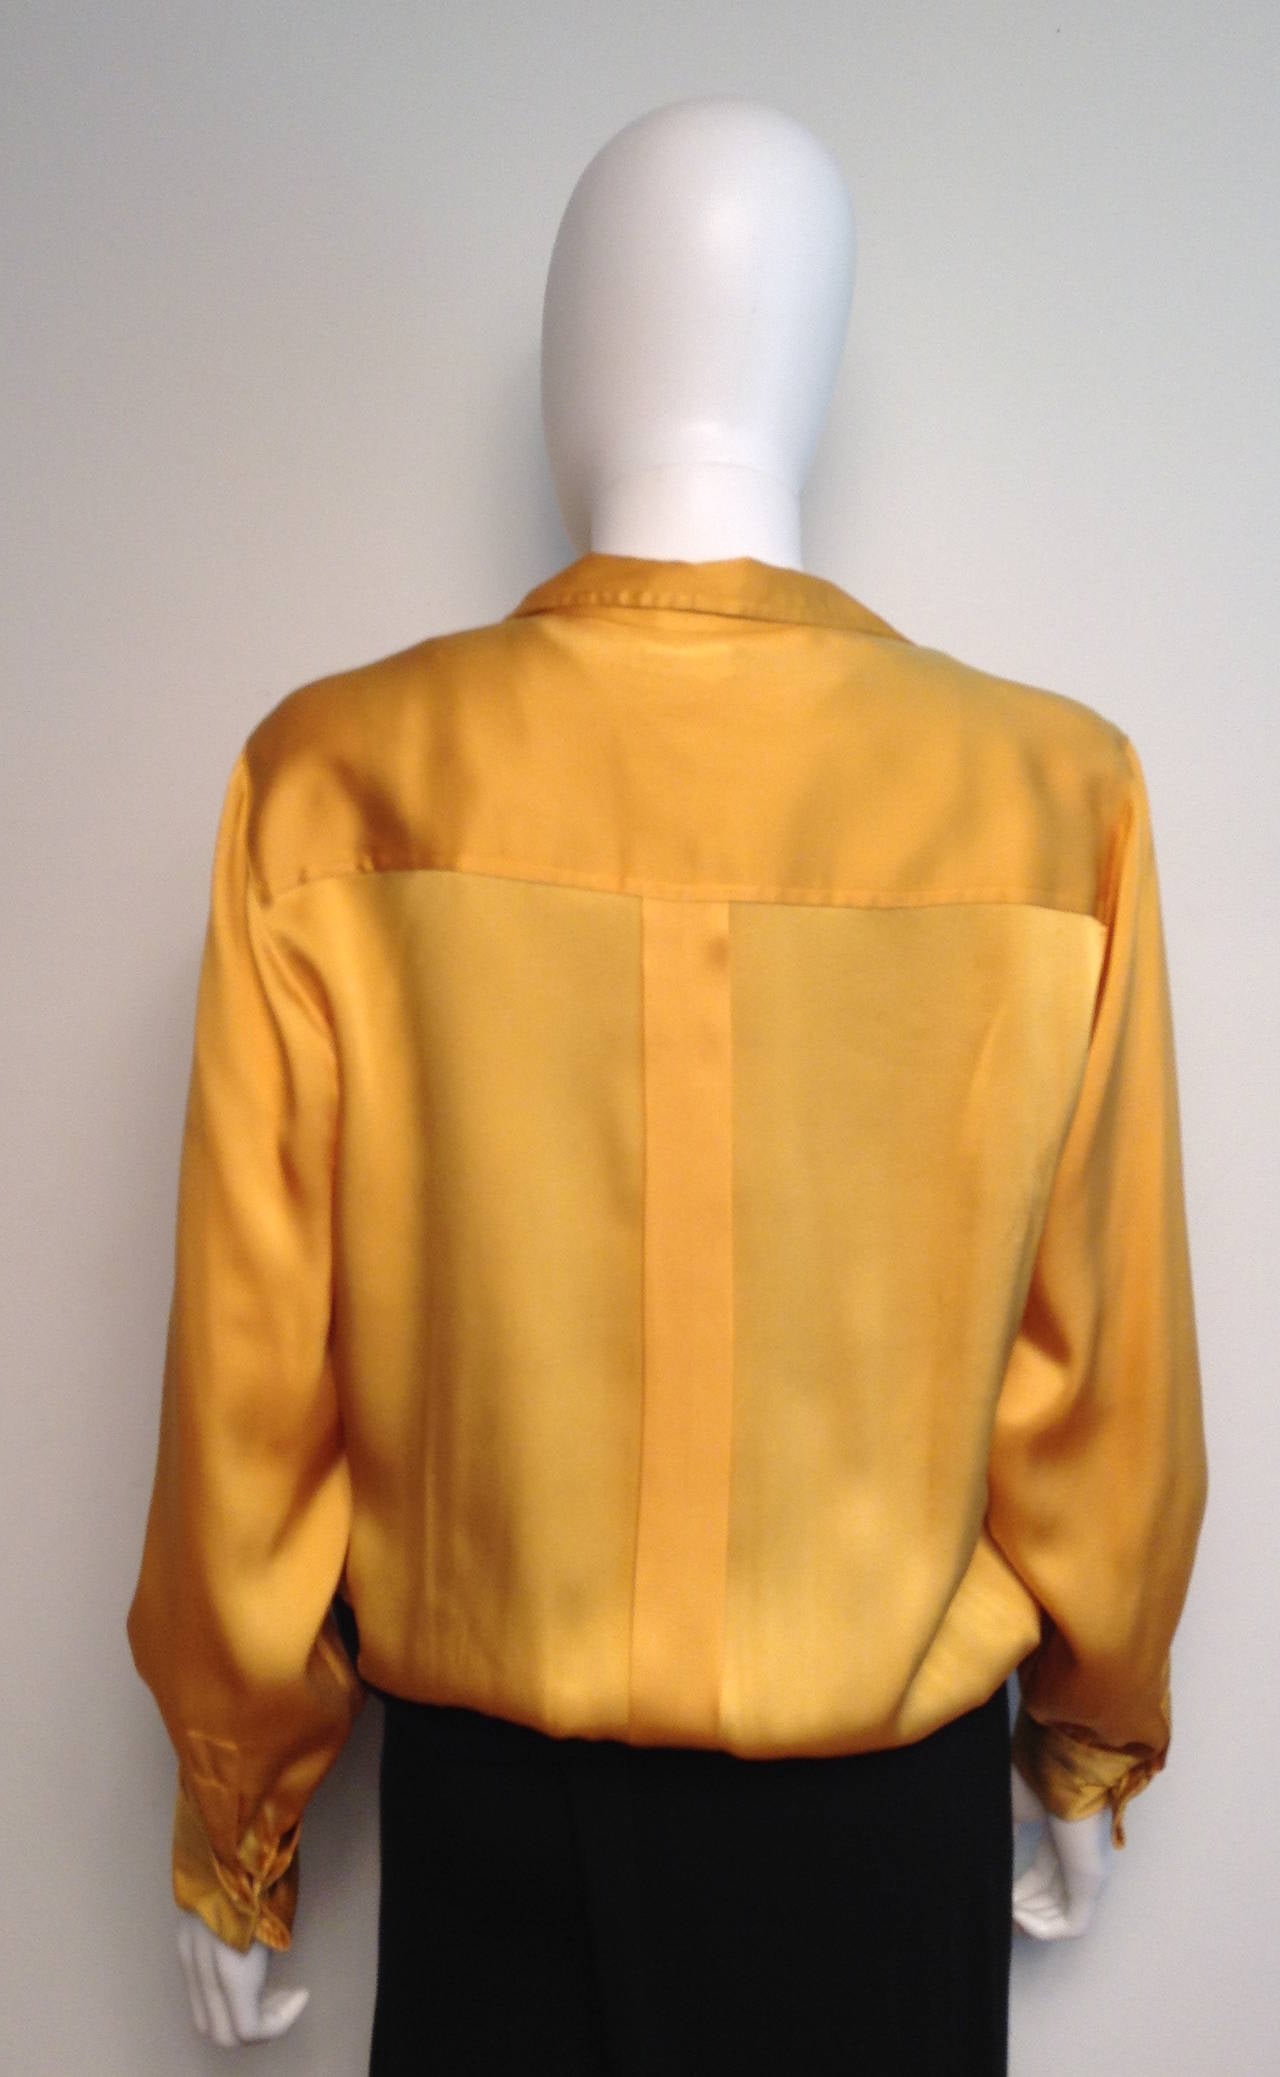 Chanel Vintage Yellow Silk Blouse Size L In Excellent Condition For Sale In Toronto, Ontario